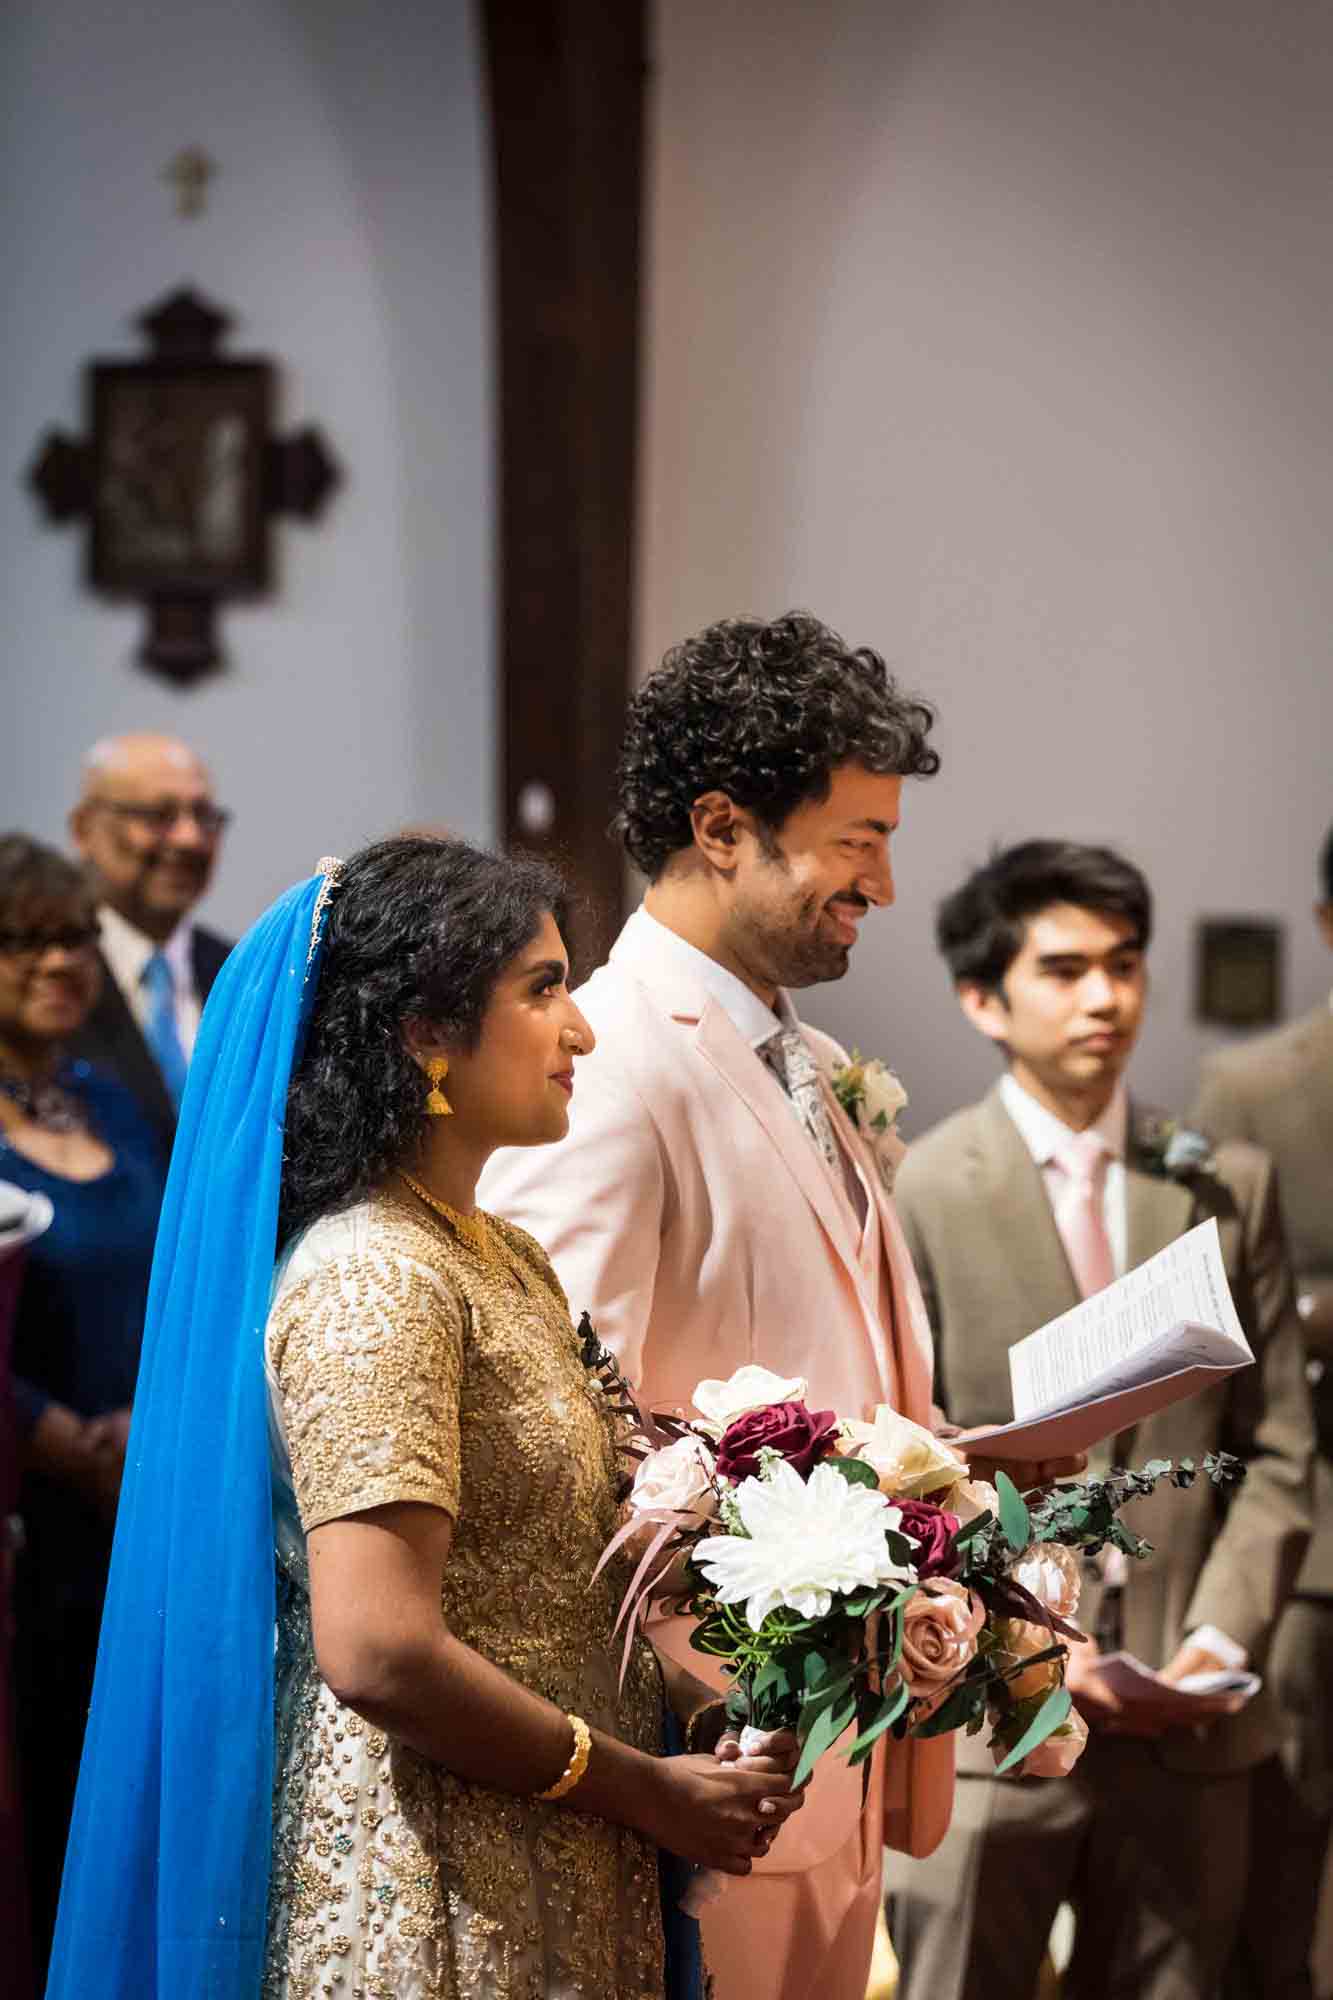 Indian bride and groom standing in front of guests during Syro-Malankara Catholic wedding ceremony